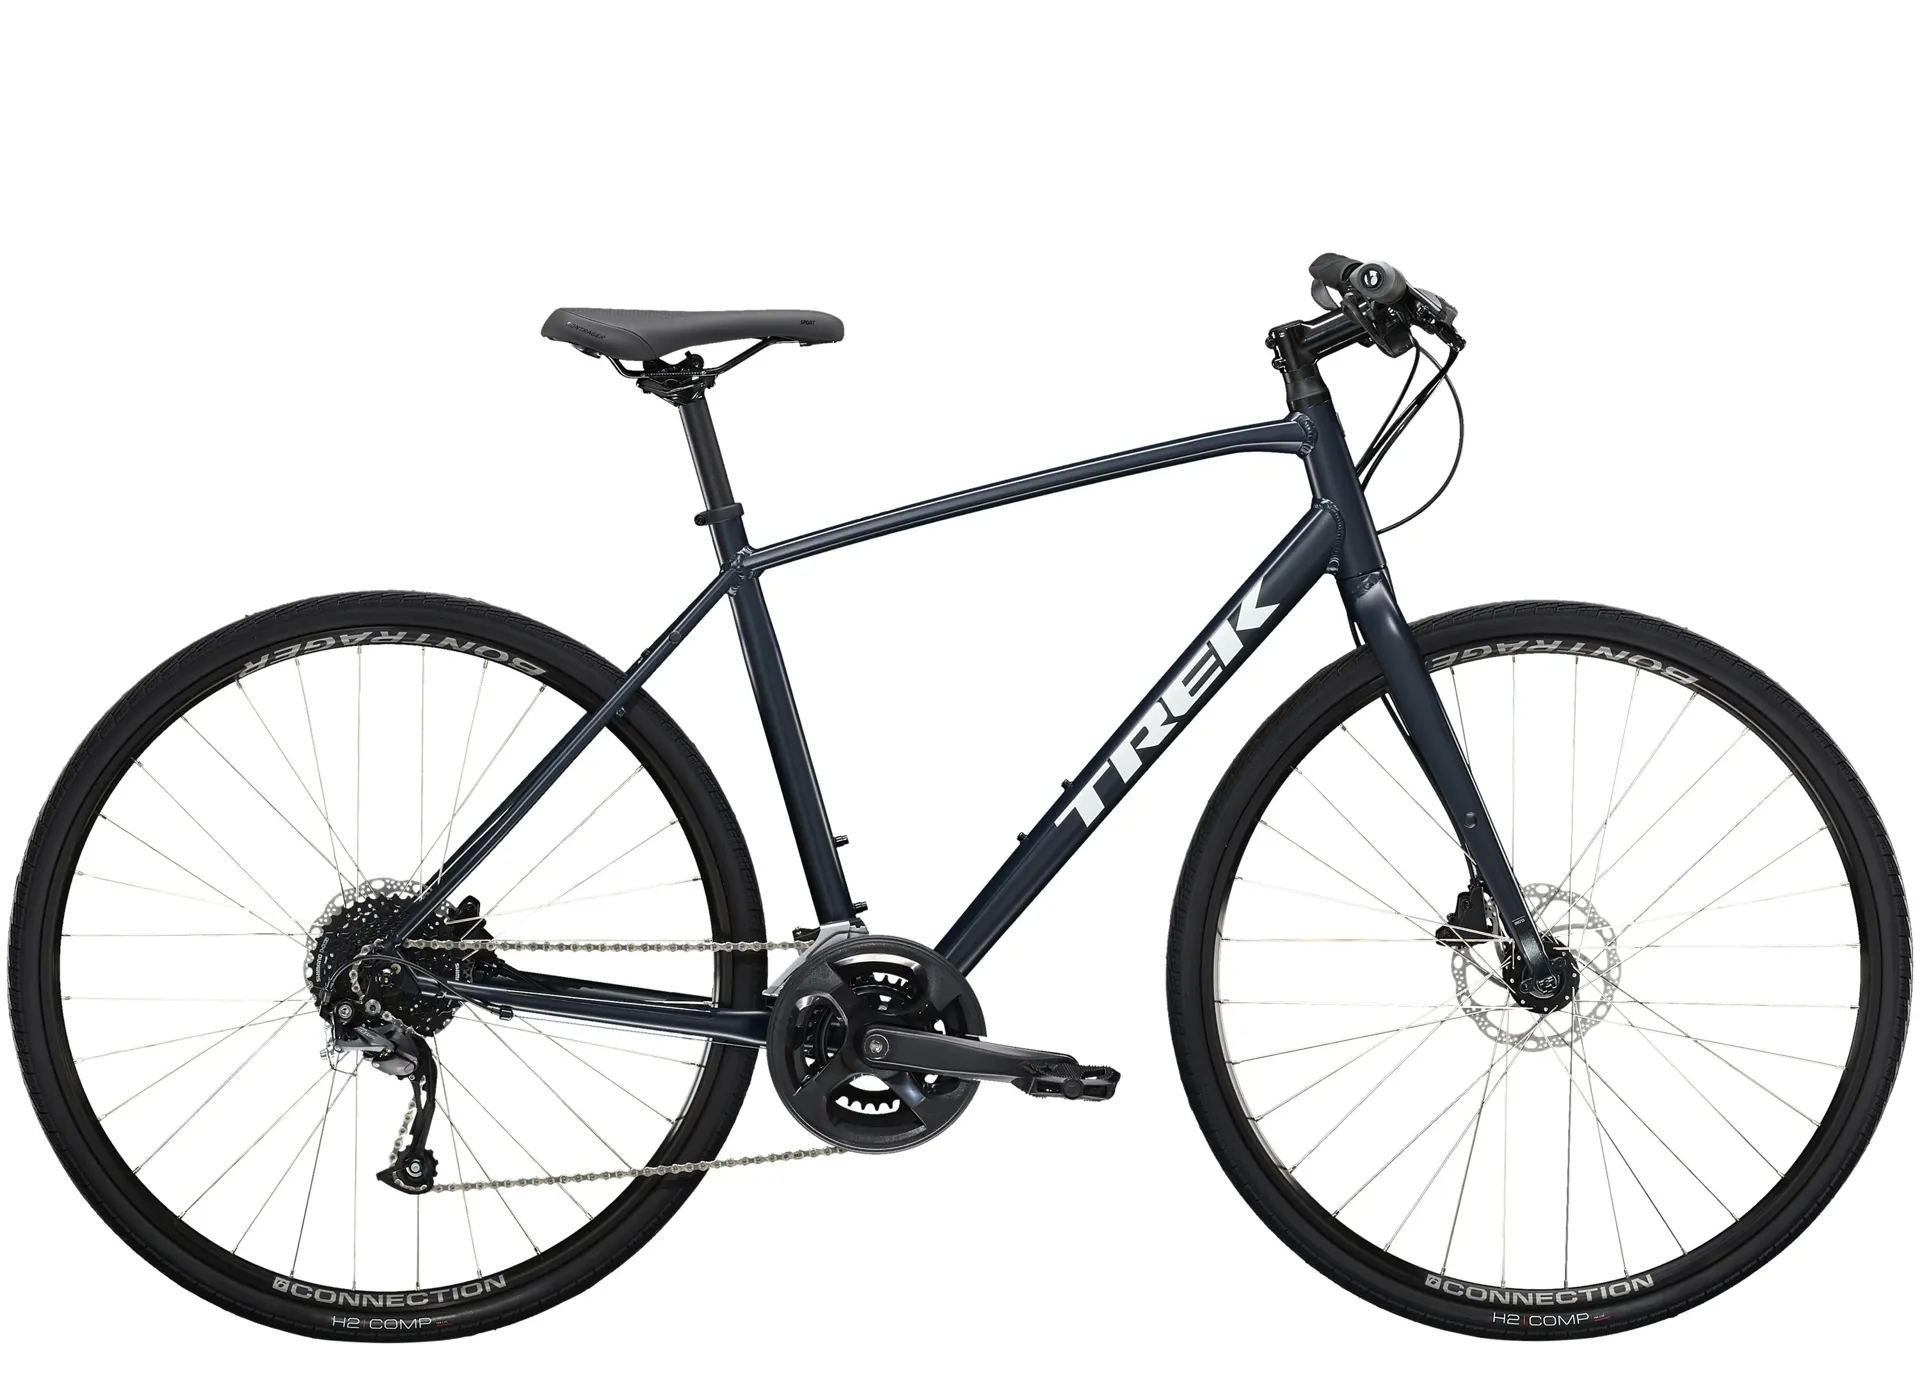 Trek fx2 touring bike. This hybrid bike is ideal for cycling on the ring road around Iceland.